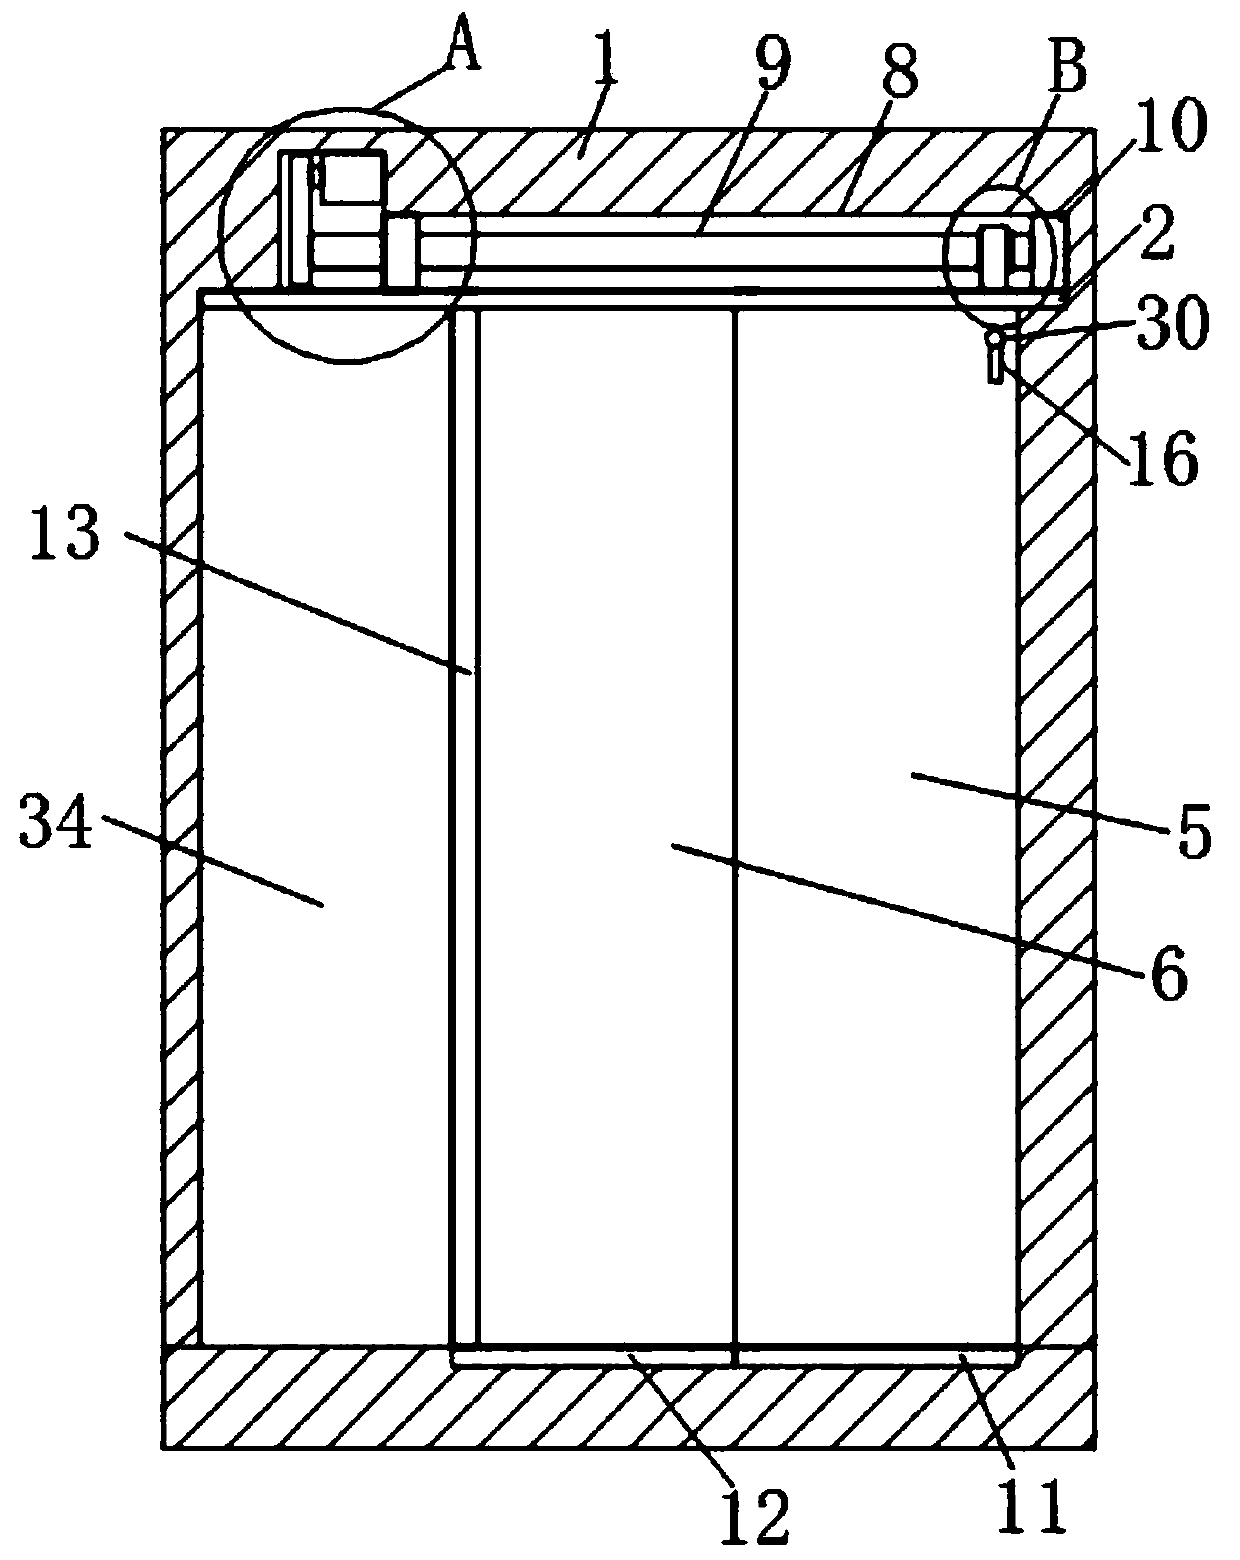 A retractable mechanism for convenient opening and closing of the interior door panel of a vehicle-mounted toilet